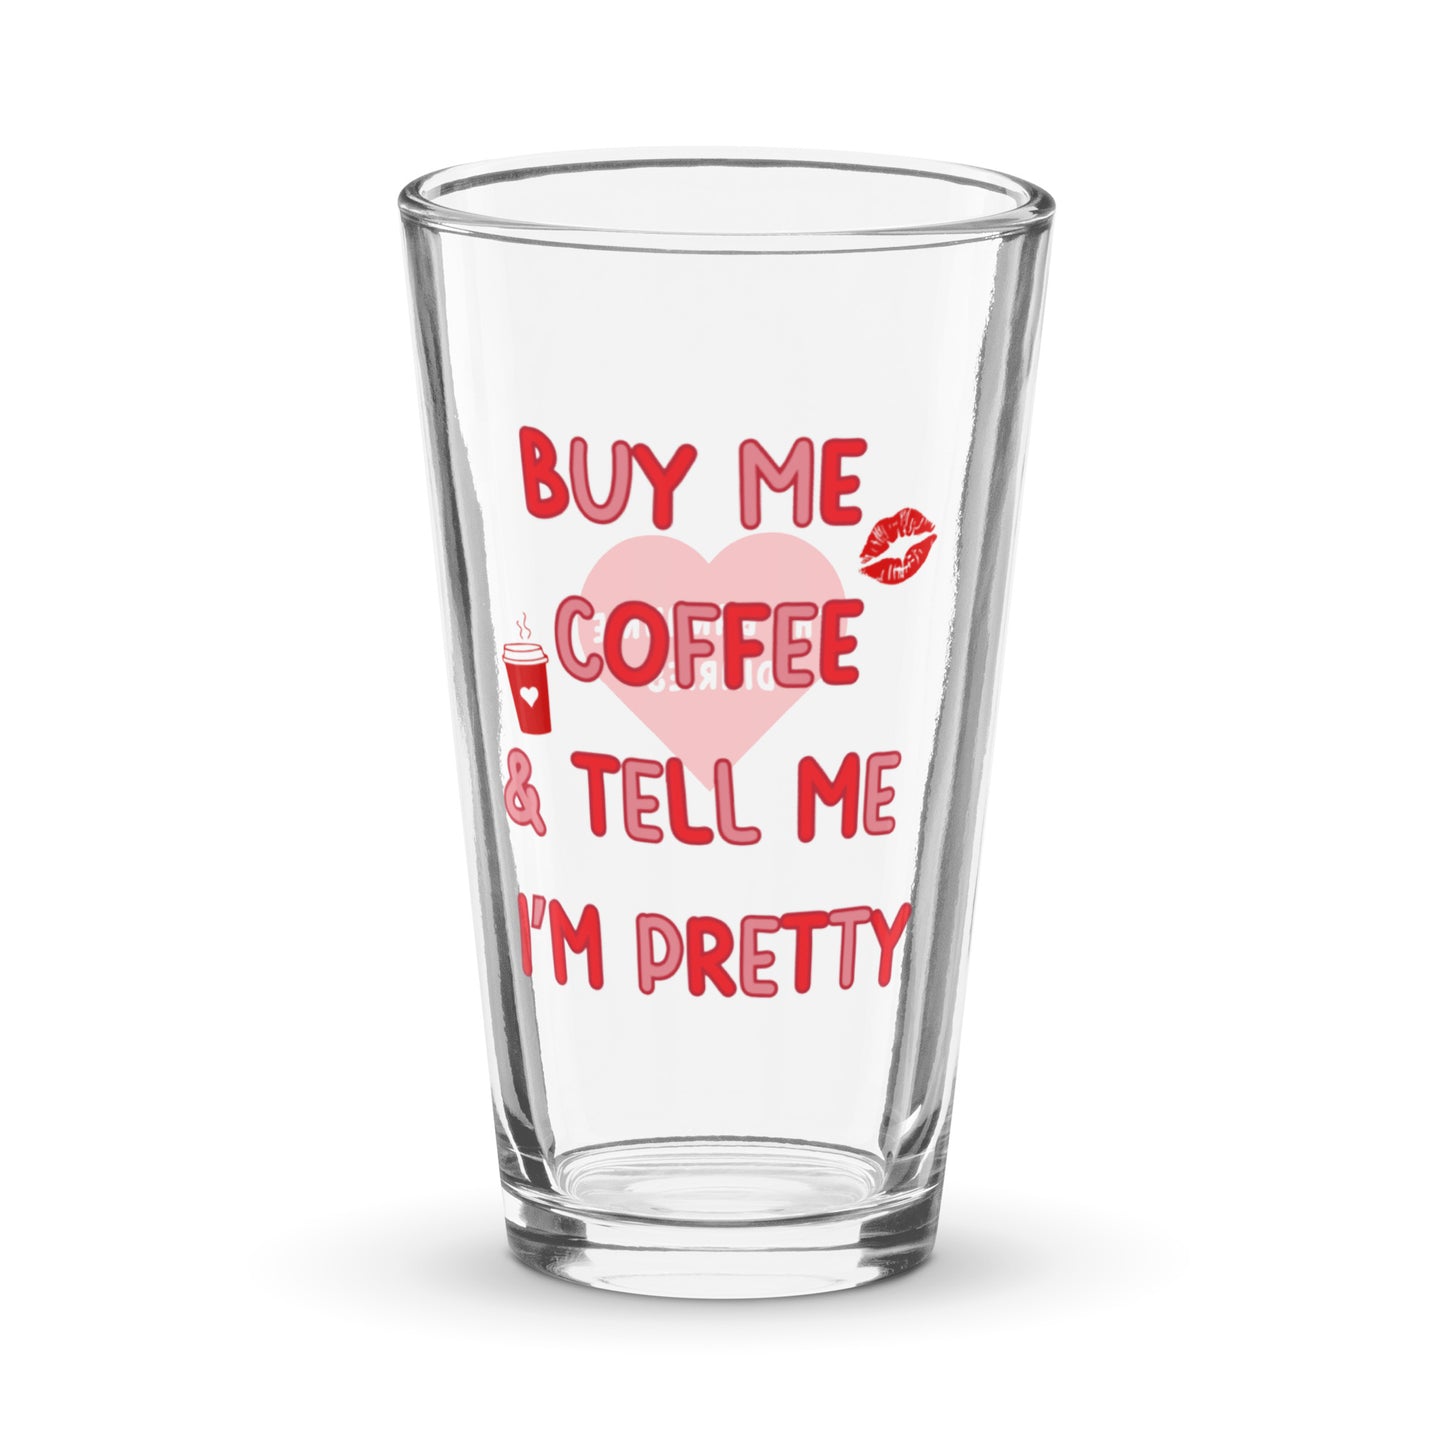 Buy Me Coffee and Tell Me I'm Pretty - Pint Glass,  by The Banannie Diaries - Volume: 16 oz. (473 ml), Glassware, Houseware